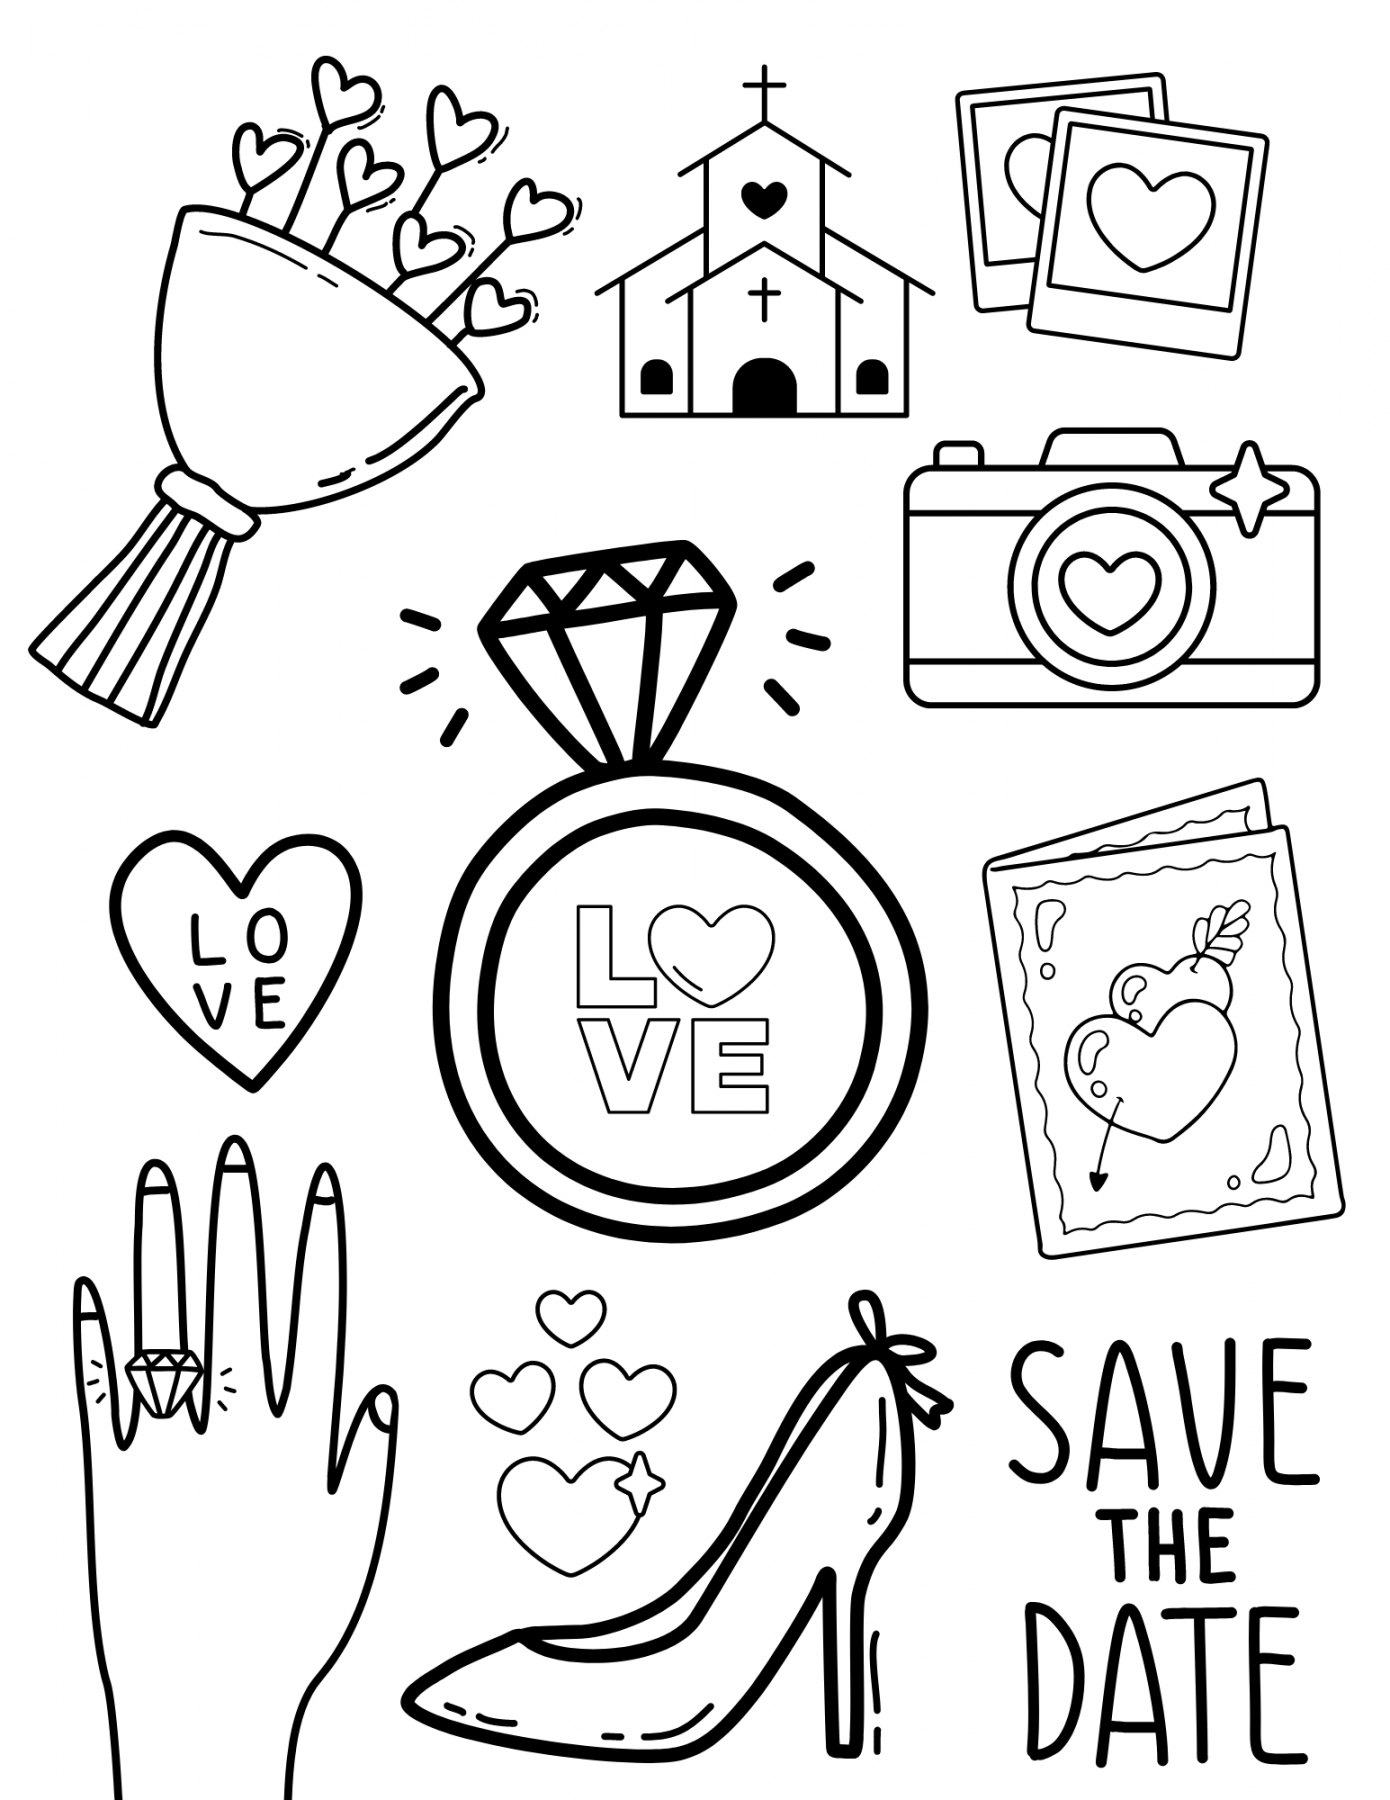 Free Printable Wedding Coloring Pages  CheapThriftyLiving - Free Printable Wedding Coloring Pages